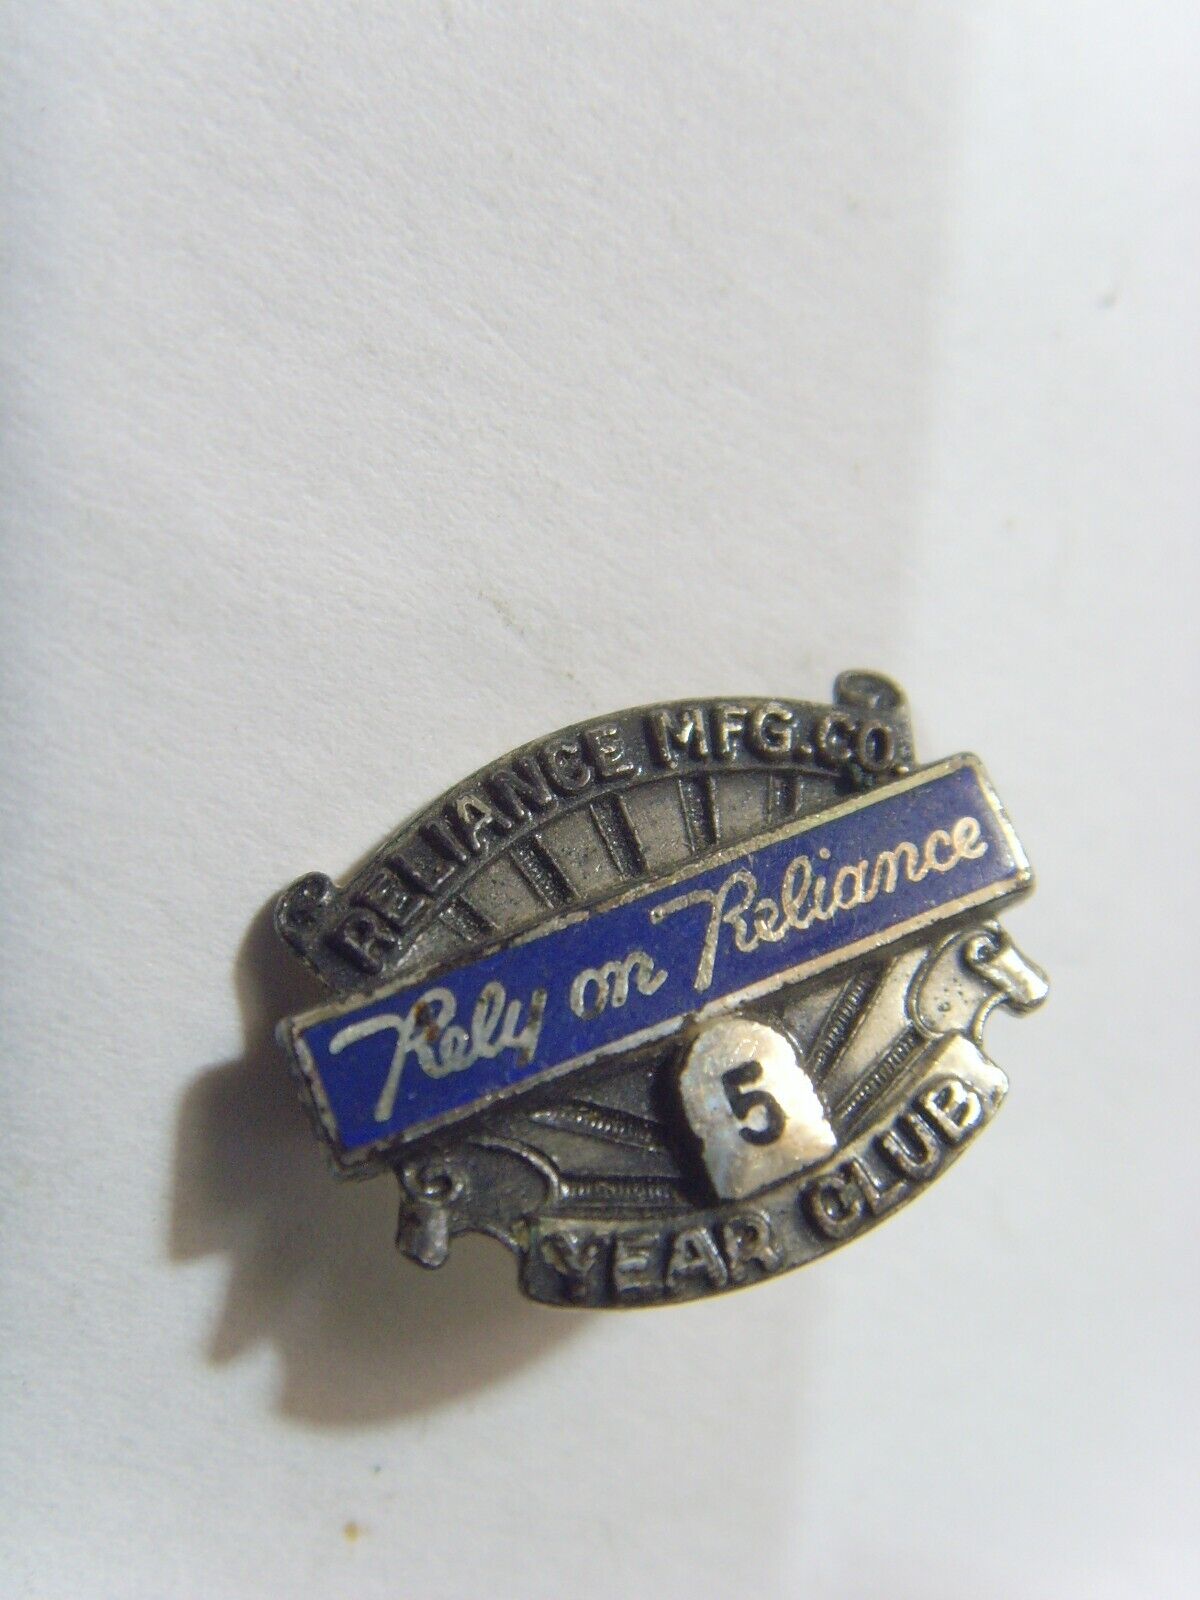 Antique reliance mfg co rely on reliance brooch pin 5 year club FC1187